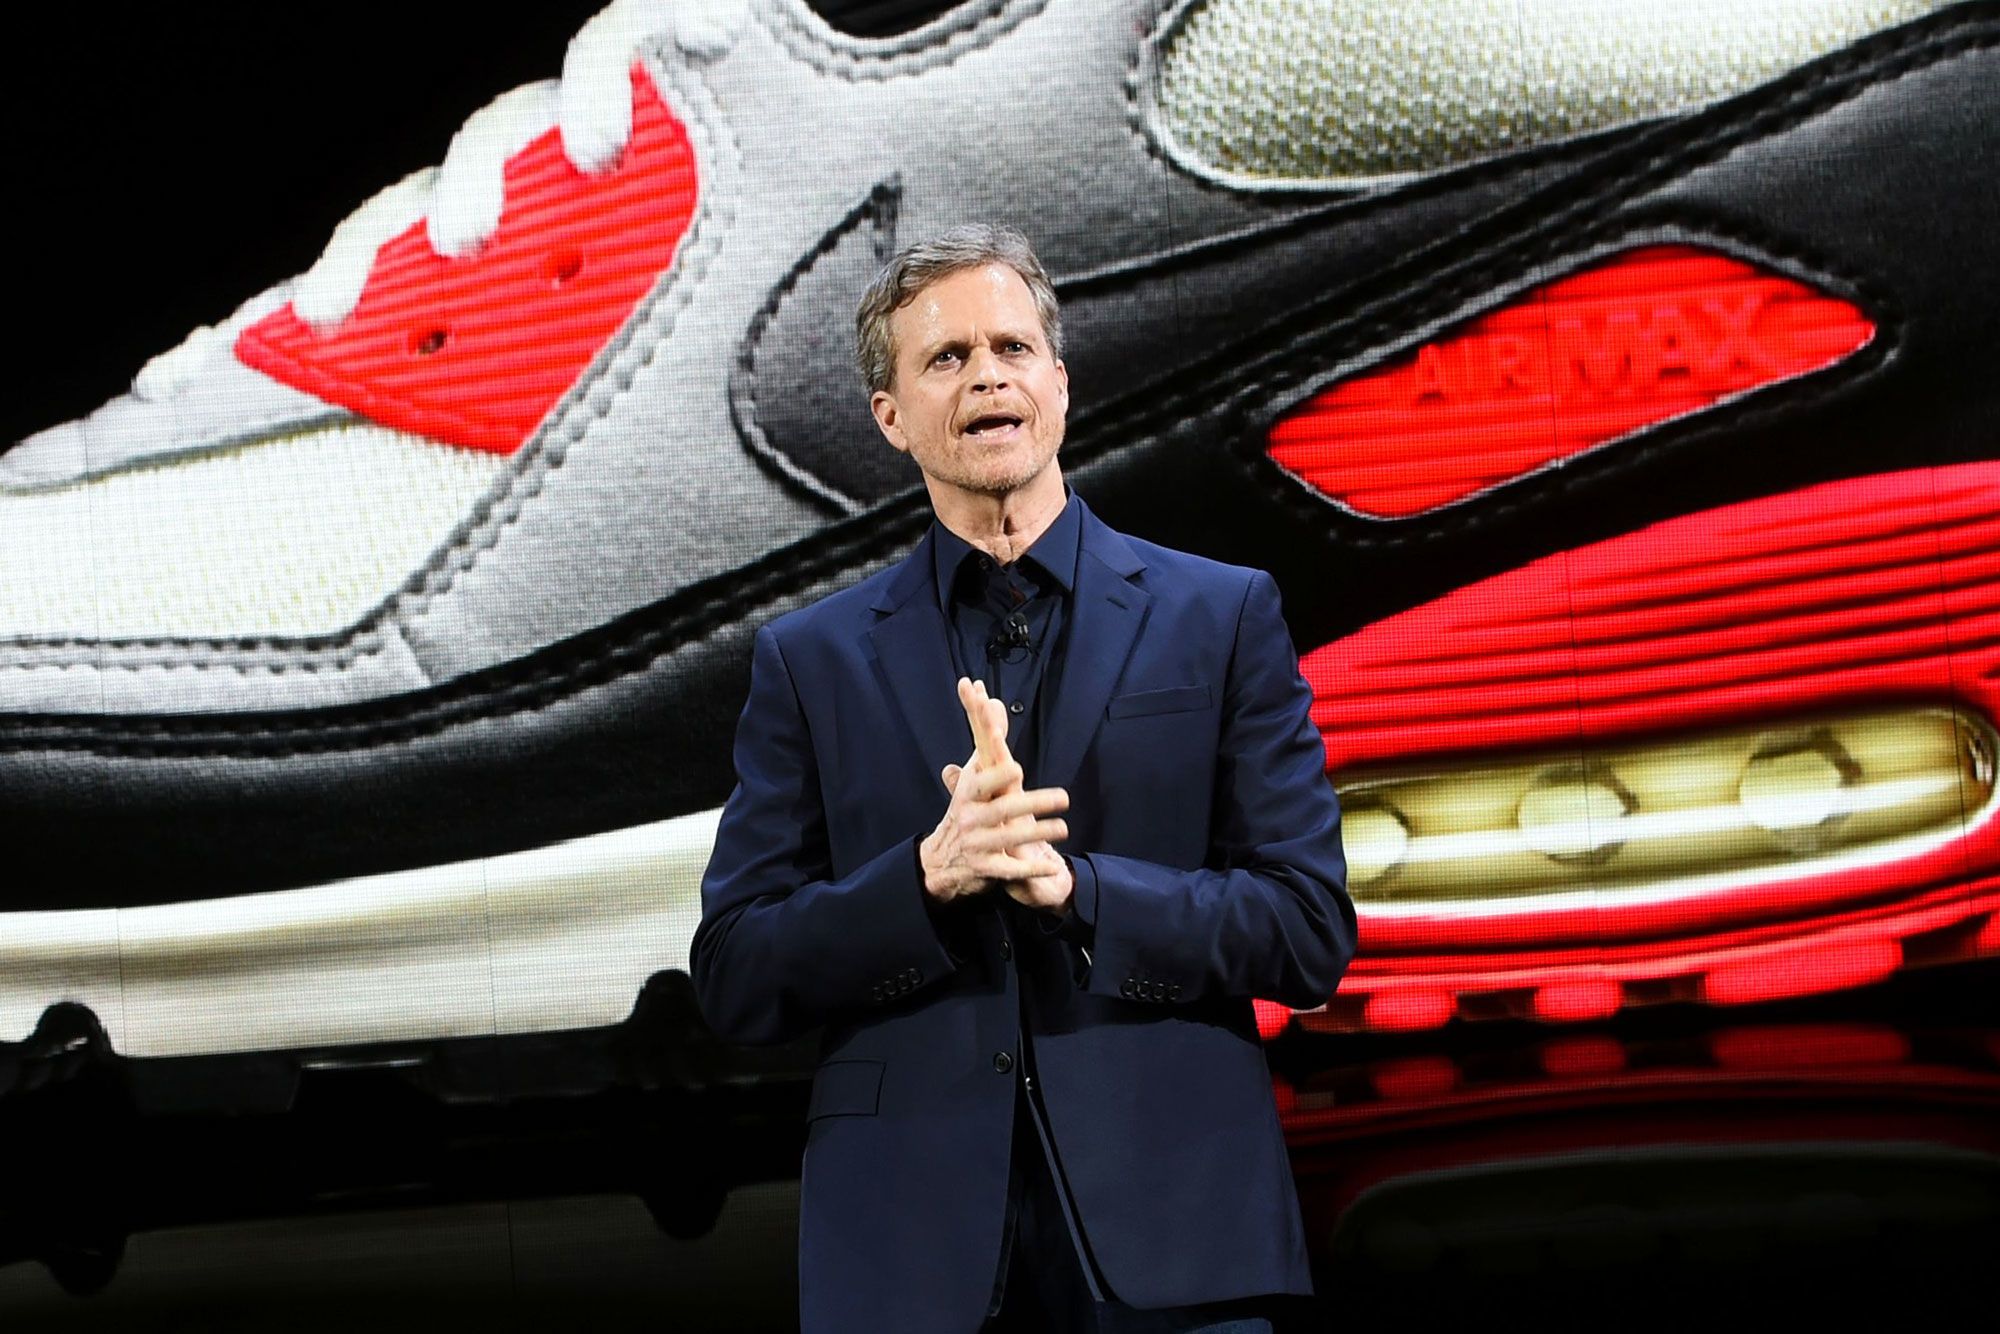 Nike reports fiscal 4Q 2019 earnings